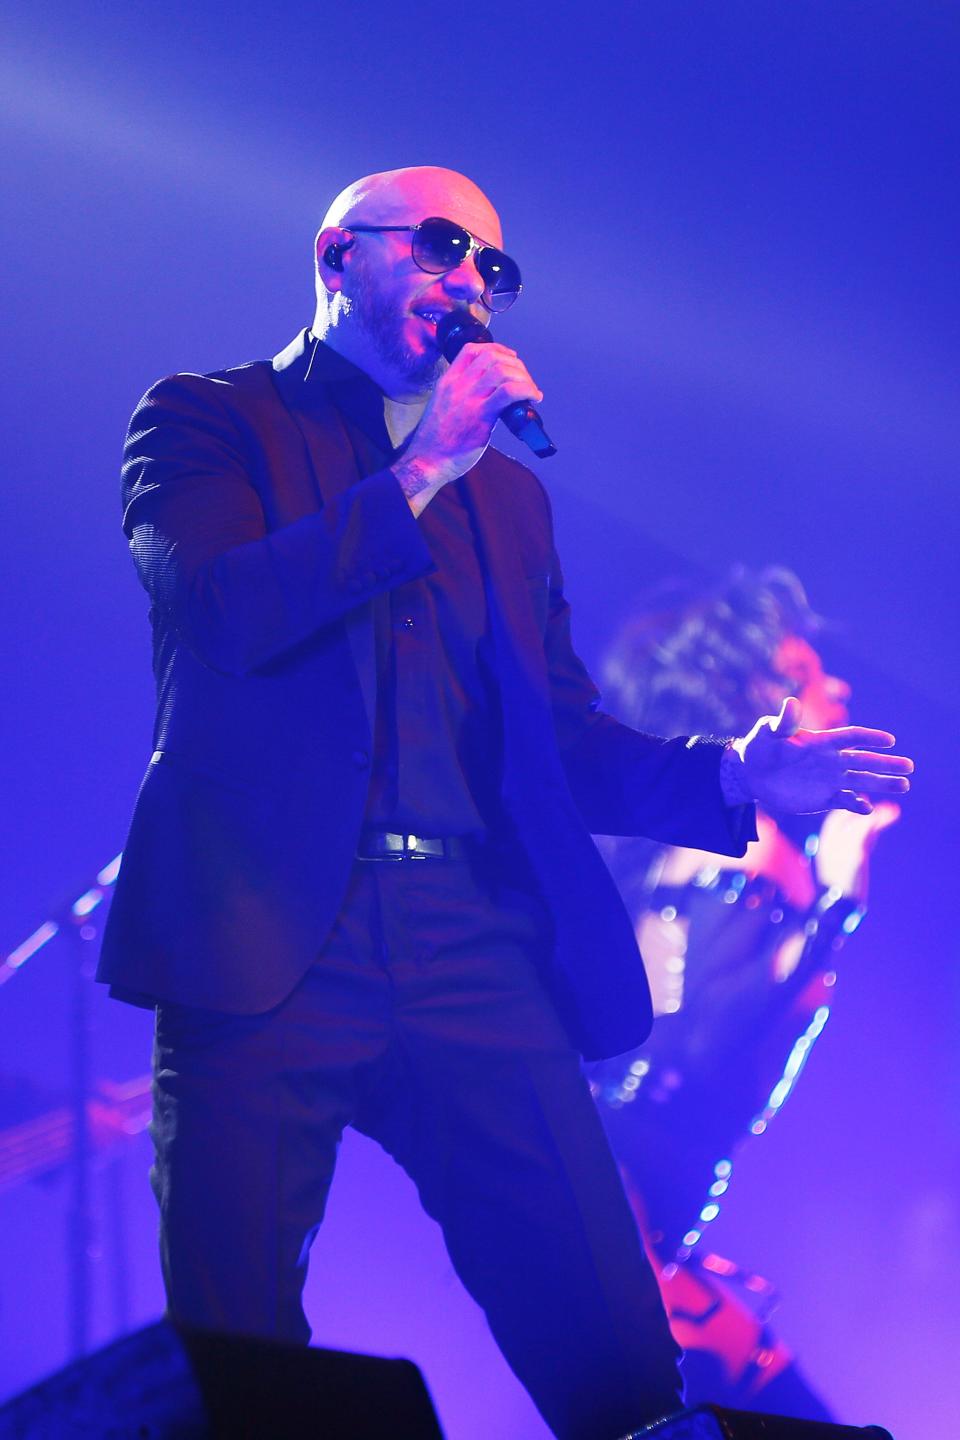 Pitbull will bring his "Can't Stop Us Now" tour to El Paso. The rapper will perform Sunday at the Don Haskins Center